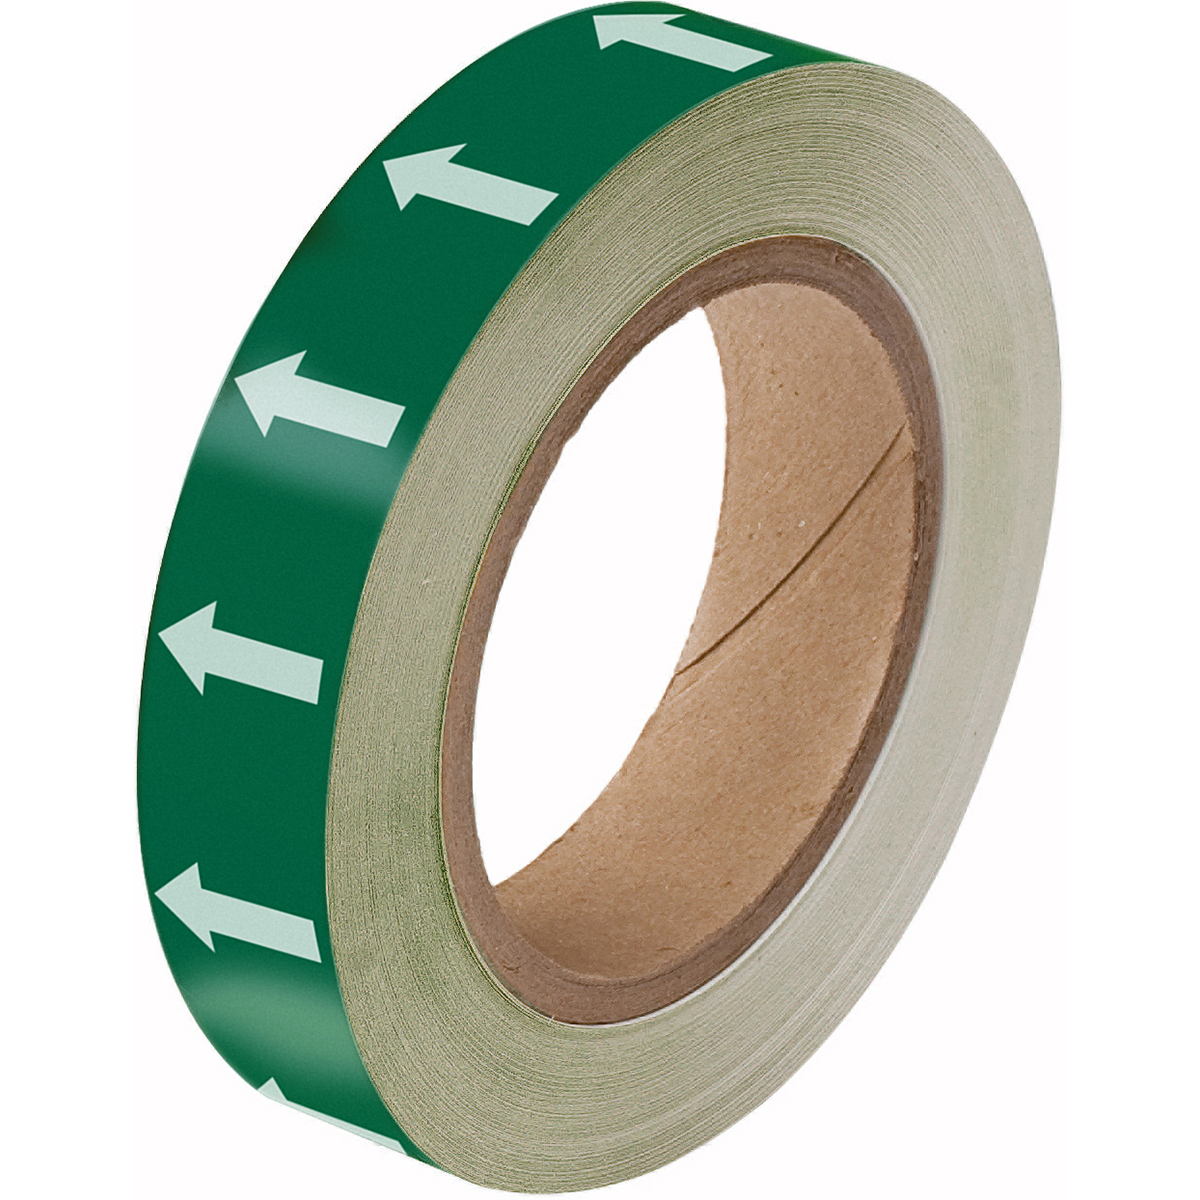 White on Green Directional Flow Arrow Tape 